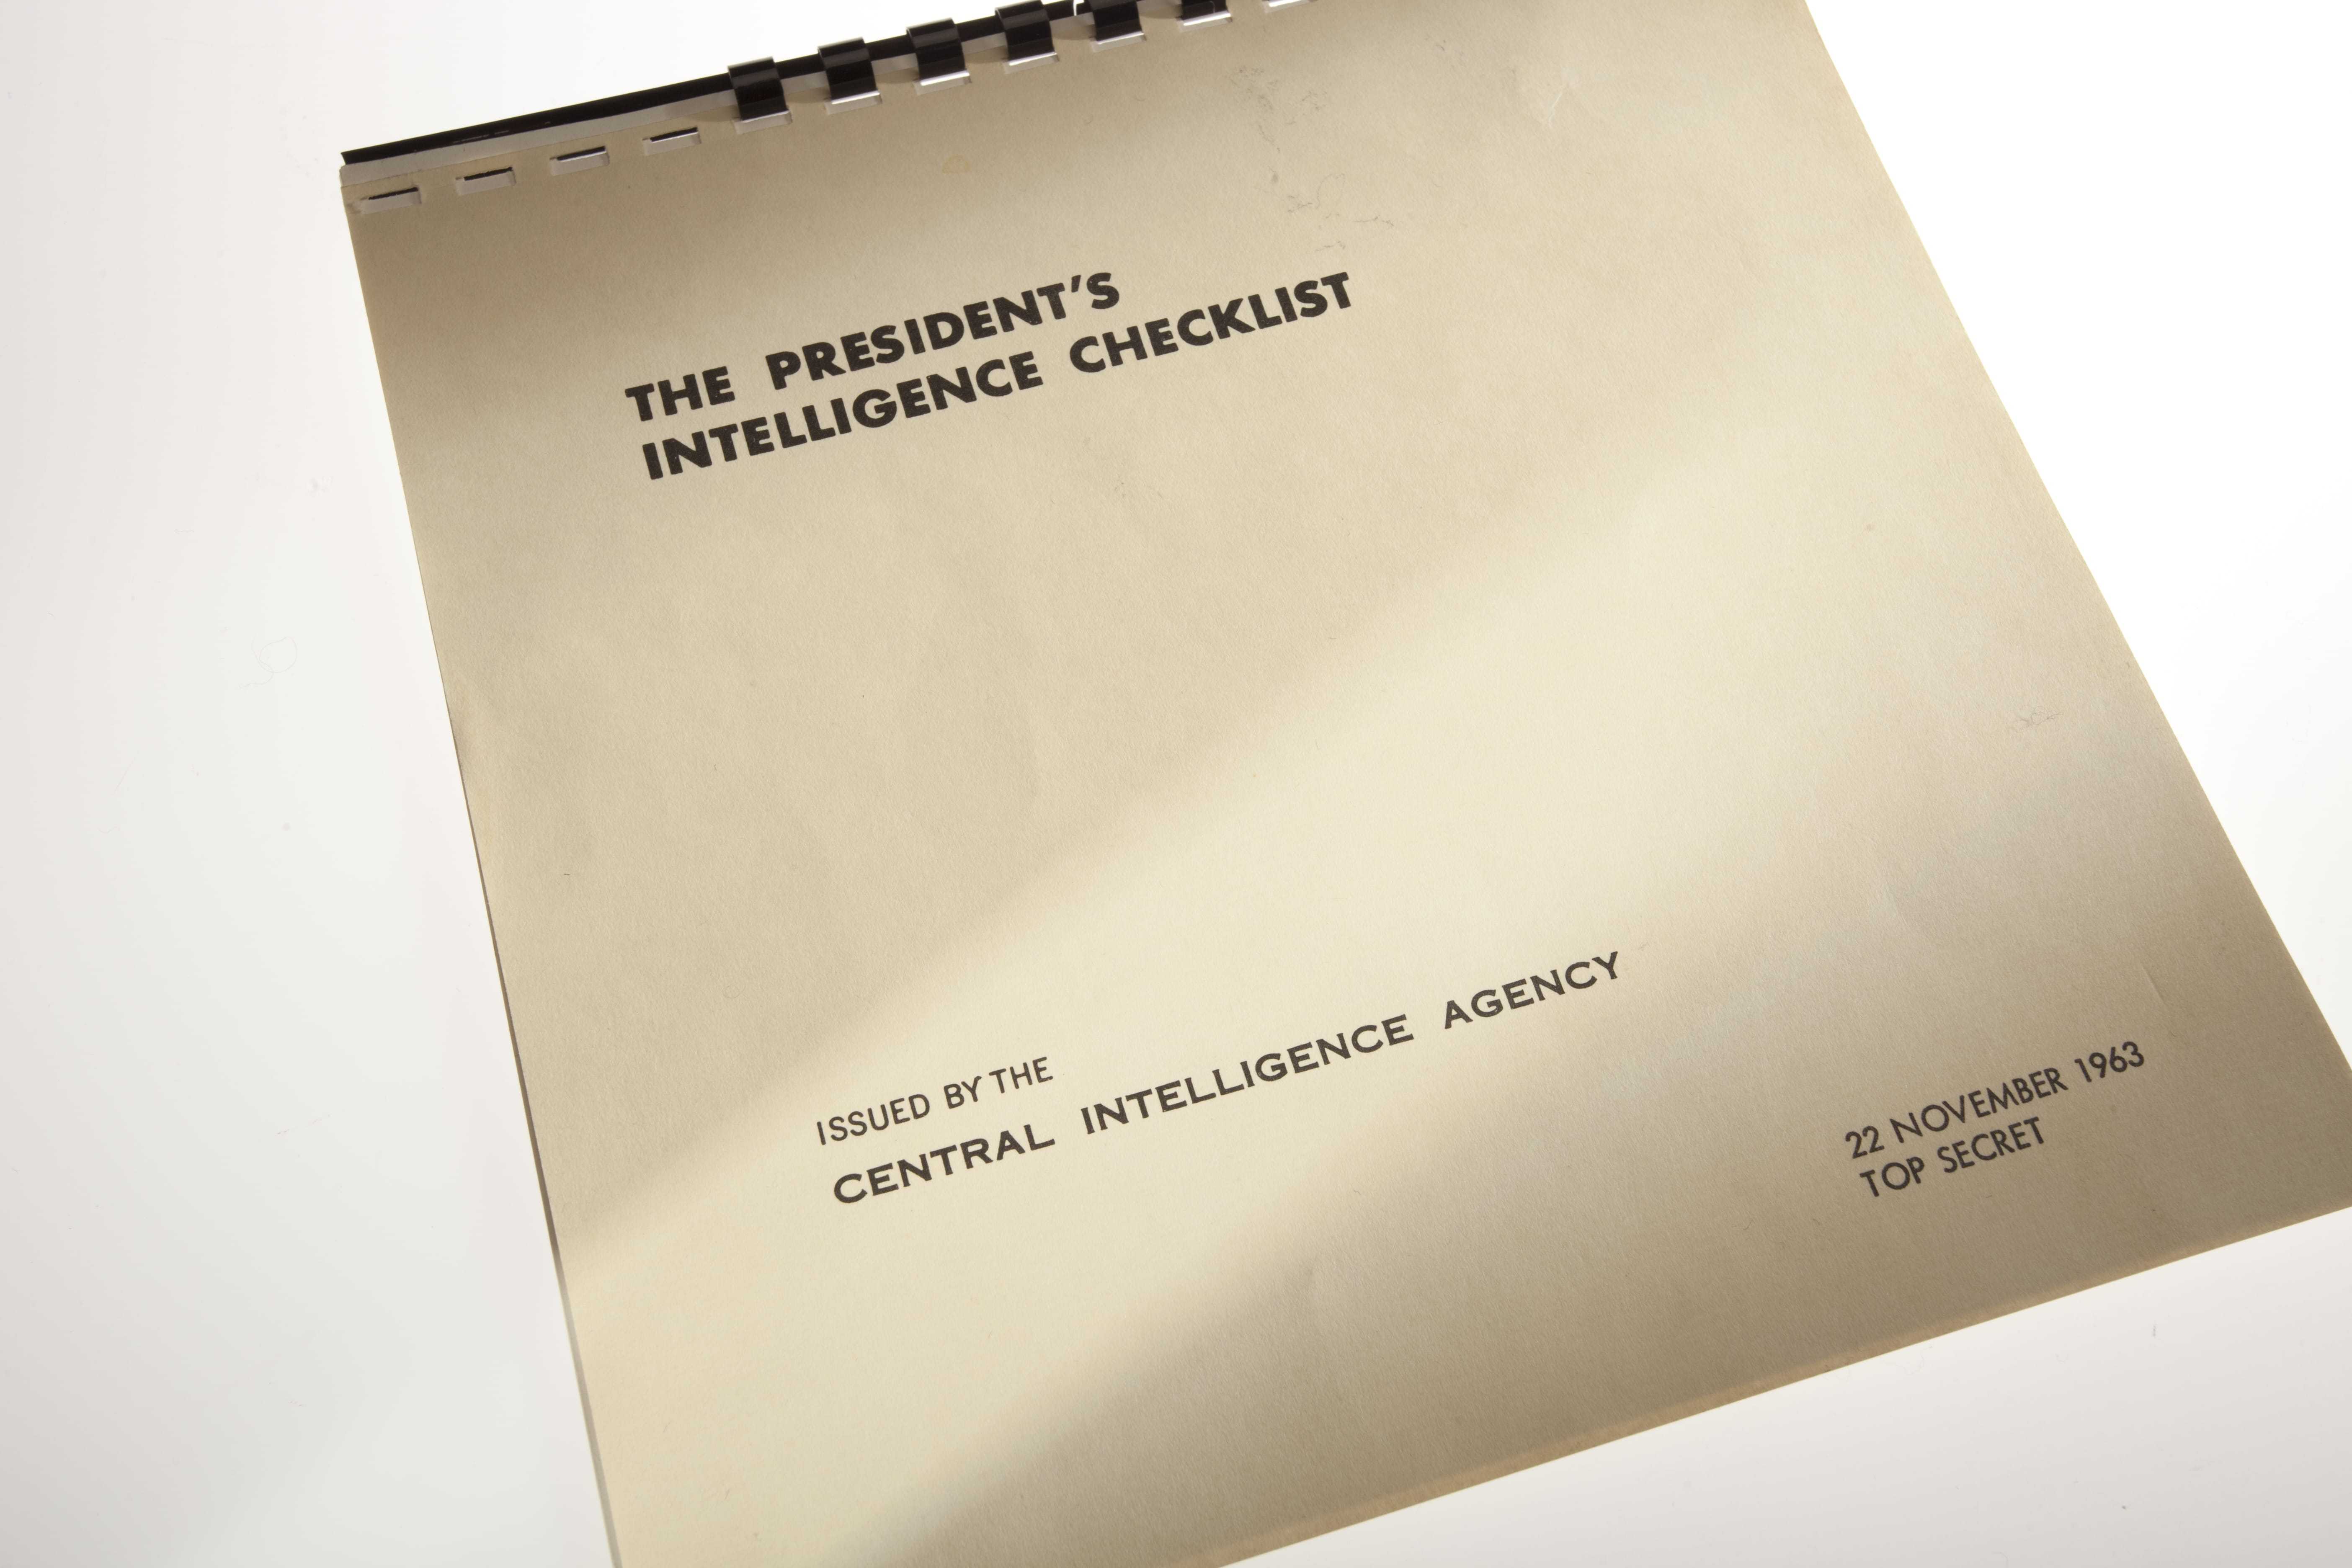 A paper titled "The President's Intelligence Checklist" dated 22 November 1963 and marked "Top Secret."